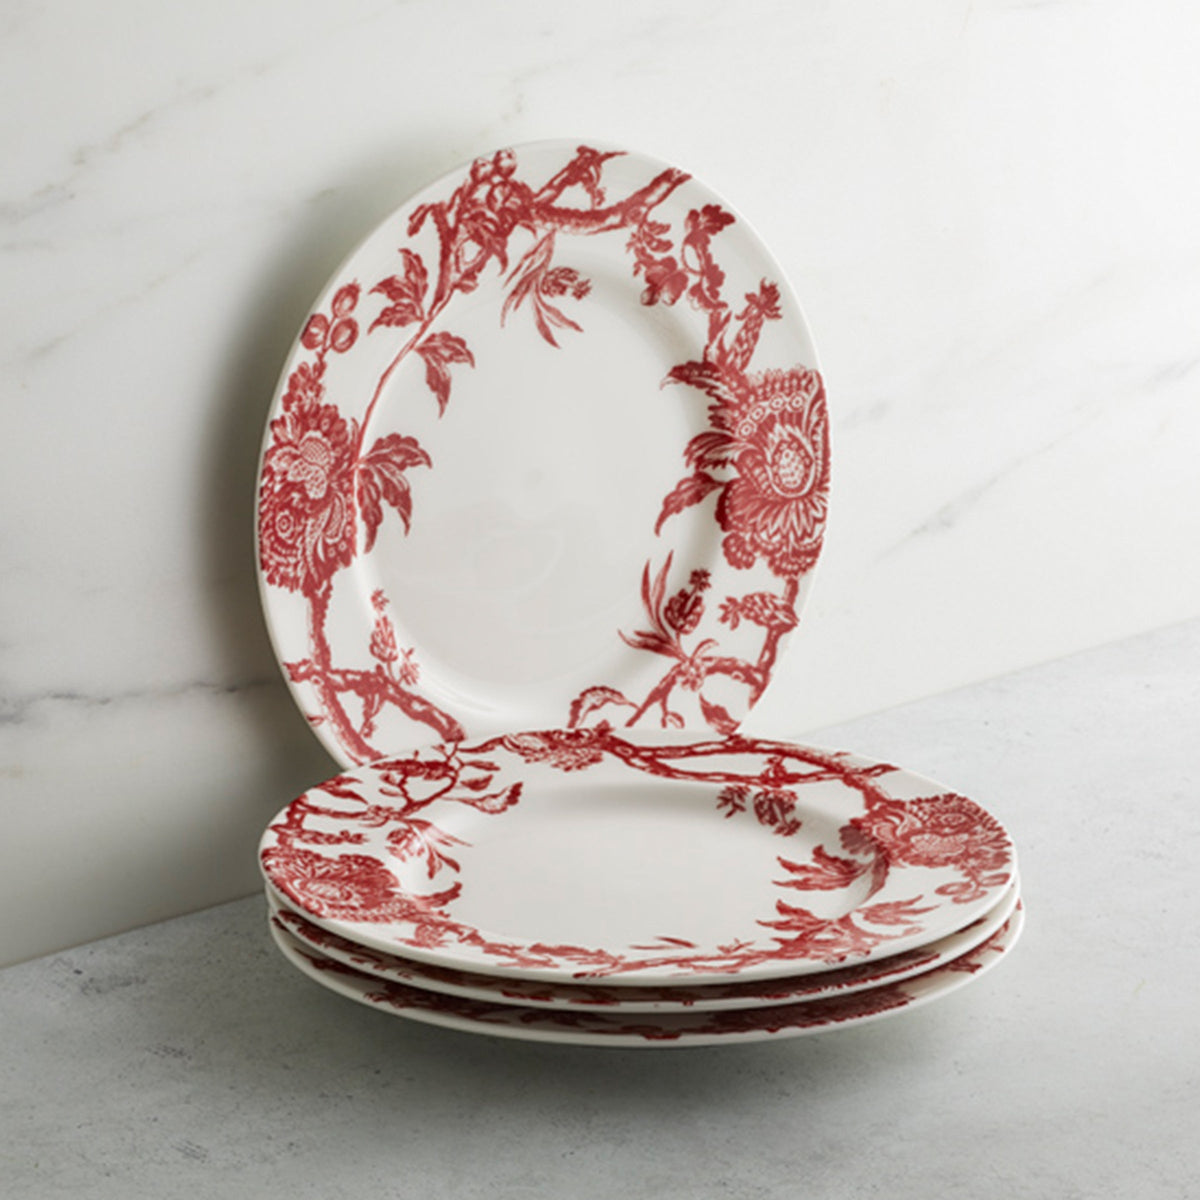 Three Arcadia Crimson Red and White Porcelain Salad Plates are stacked, with a fourth upright to show off the floral pattern.